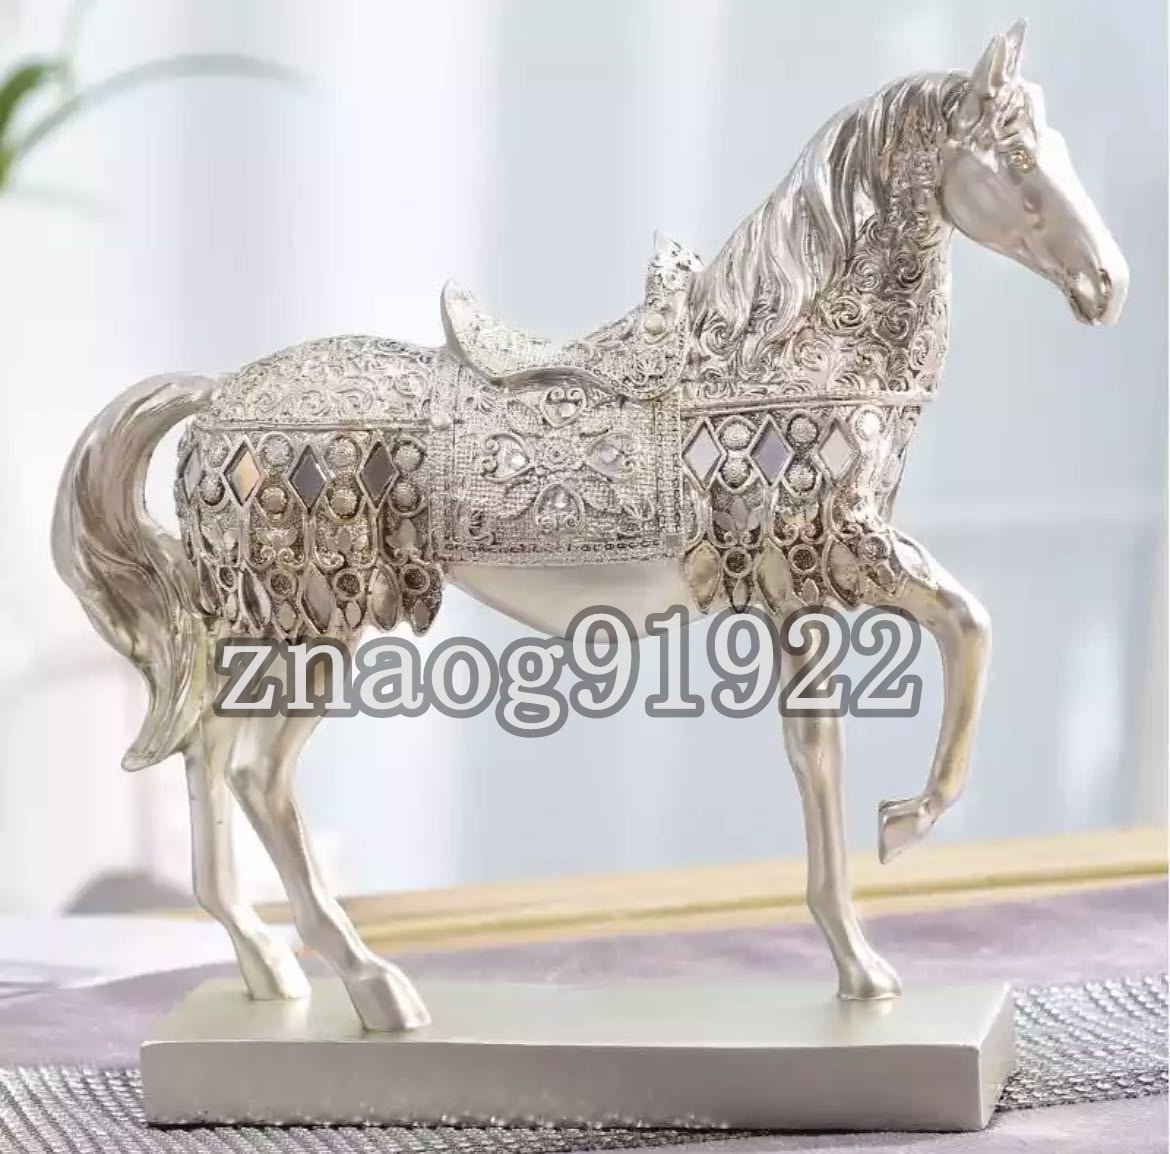 All 2 types selected Horse Figurine Interior Ornament Object Figurine Accessory Decor Living Room Horse Miscellaneous Modern Art Animal DJ975, handmade works, interior, miscellaneous goods, ornament, object